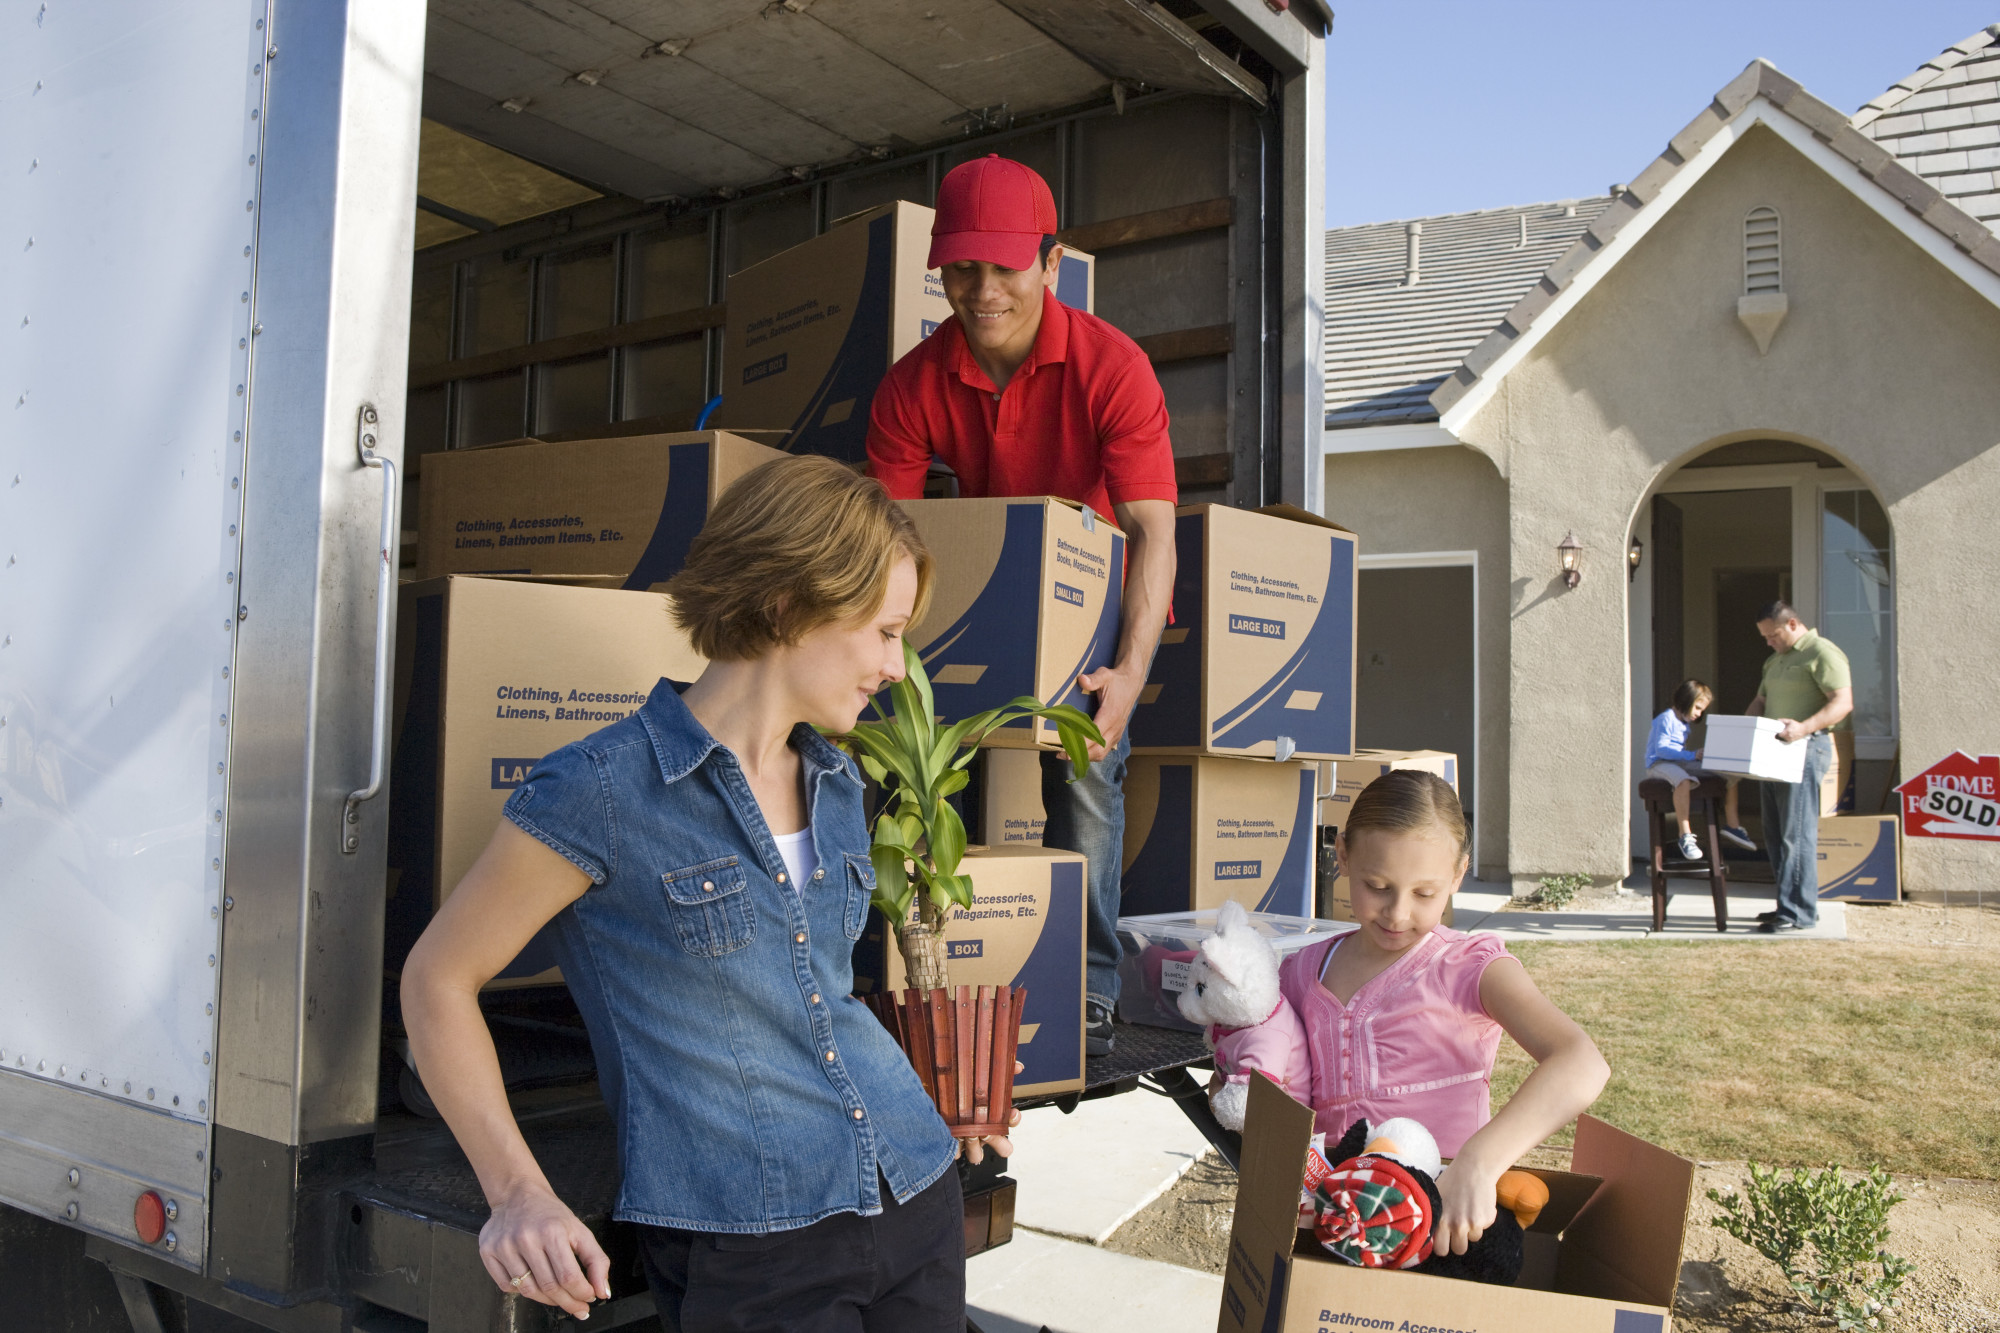 How Much Does it Cost to Hire Movers? A Useful Price Guide